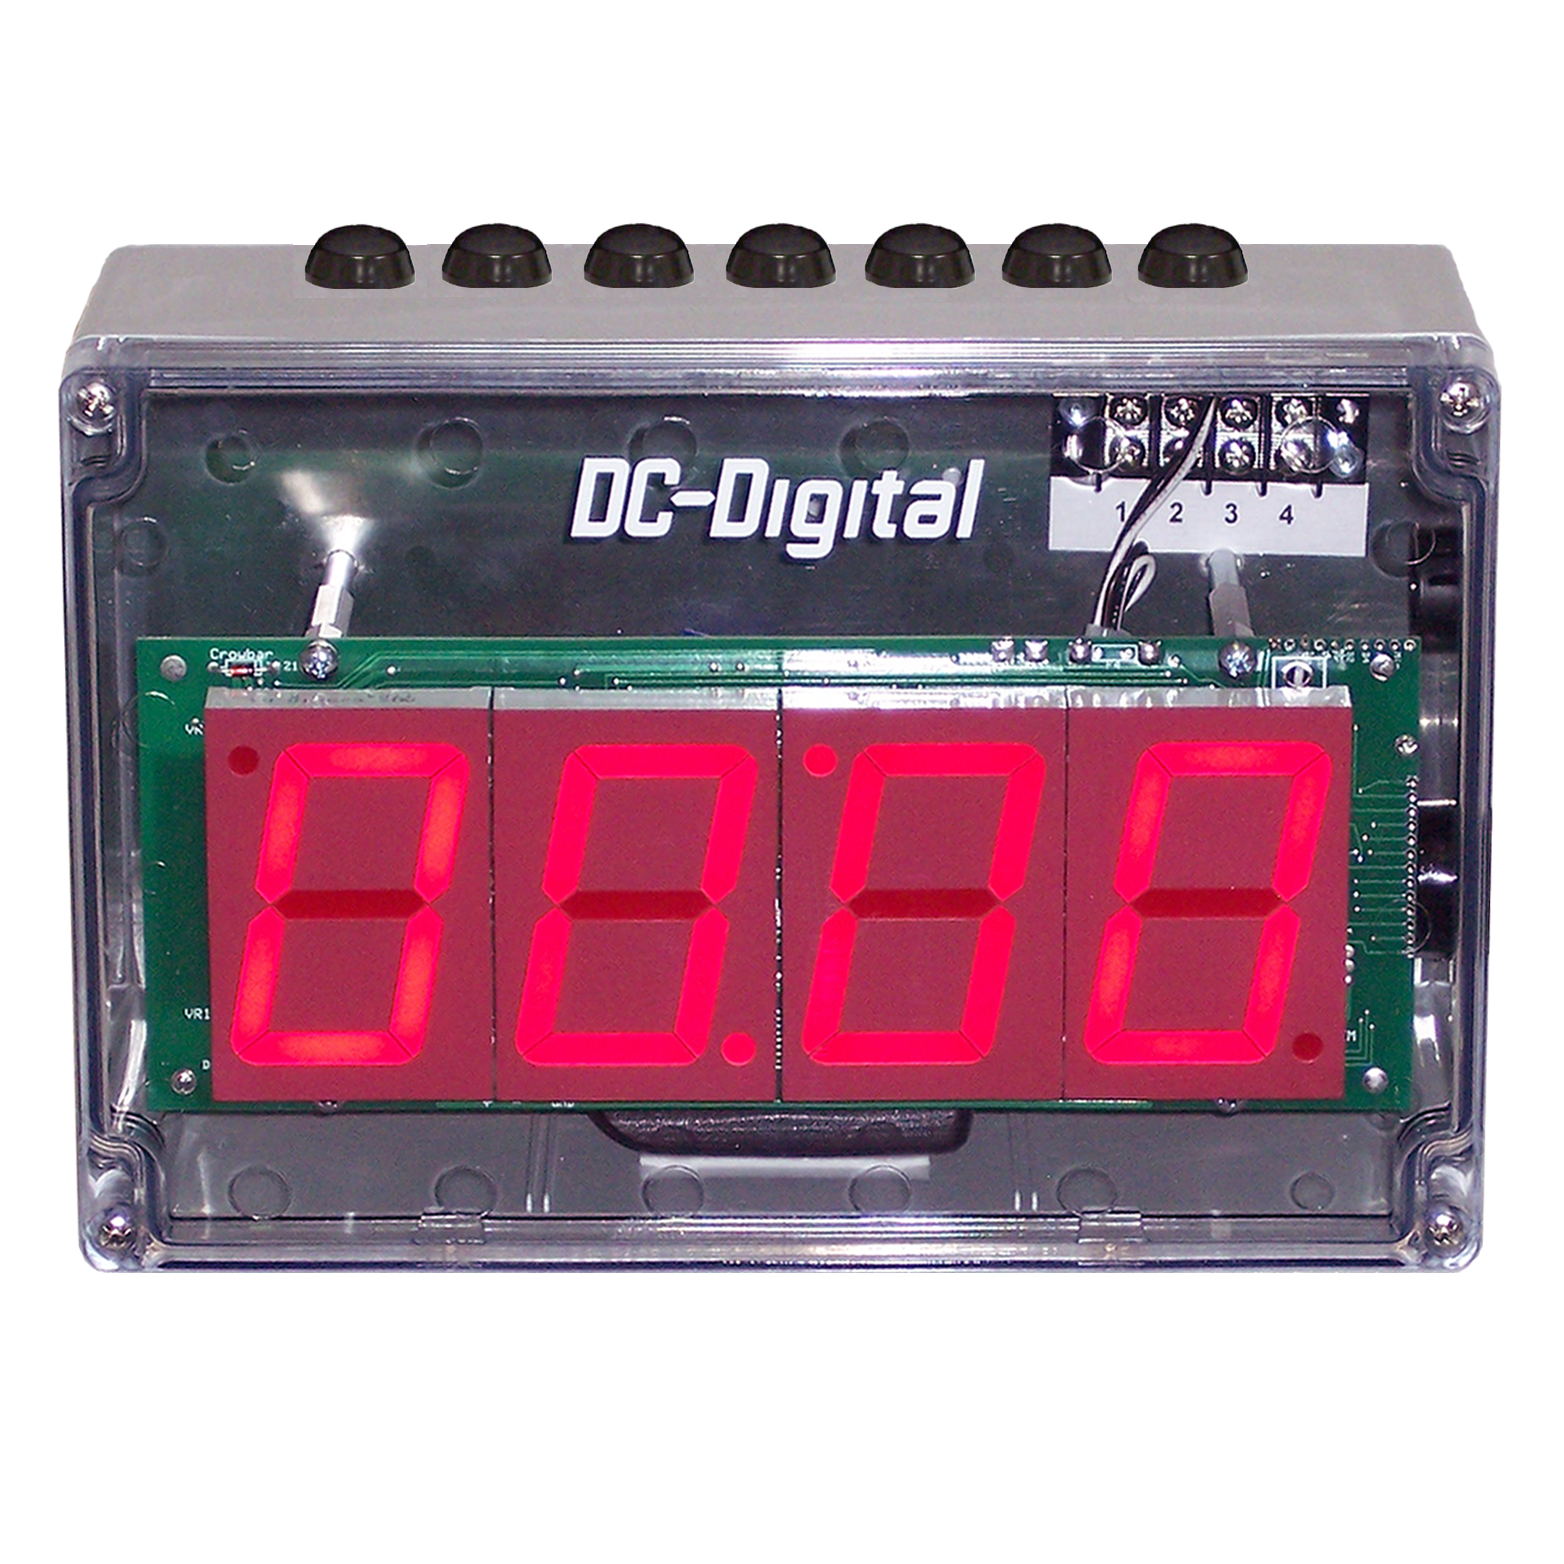 (DC-25UT-NEMA) 2.3 Inch LED Digital, Top Mounted Push-Button Controlled, Count Up timer, Countdown Timer, Time of Day Clock in Nema 4X,6,6P,12,12K,13, IP-66 Enclosure